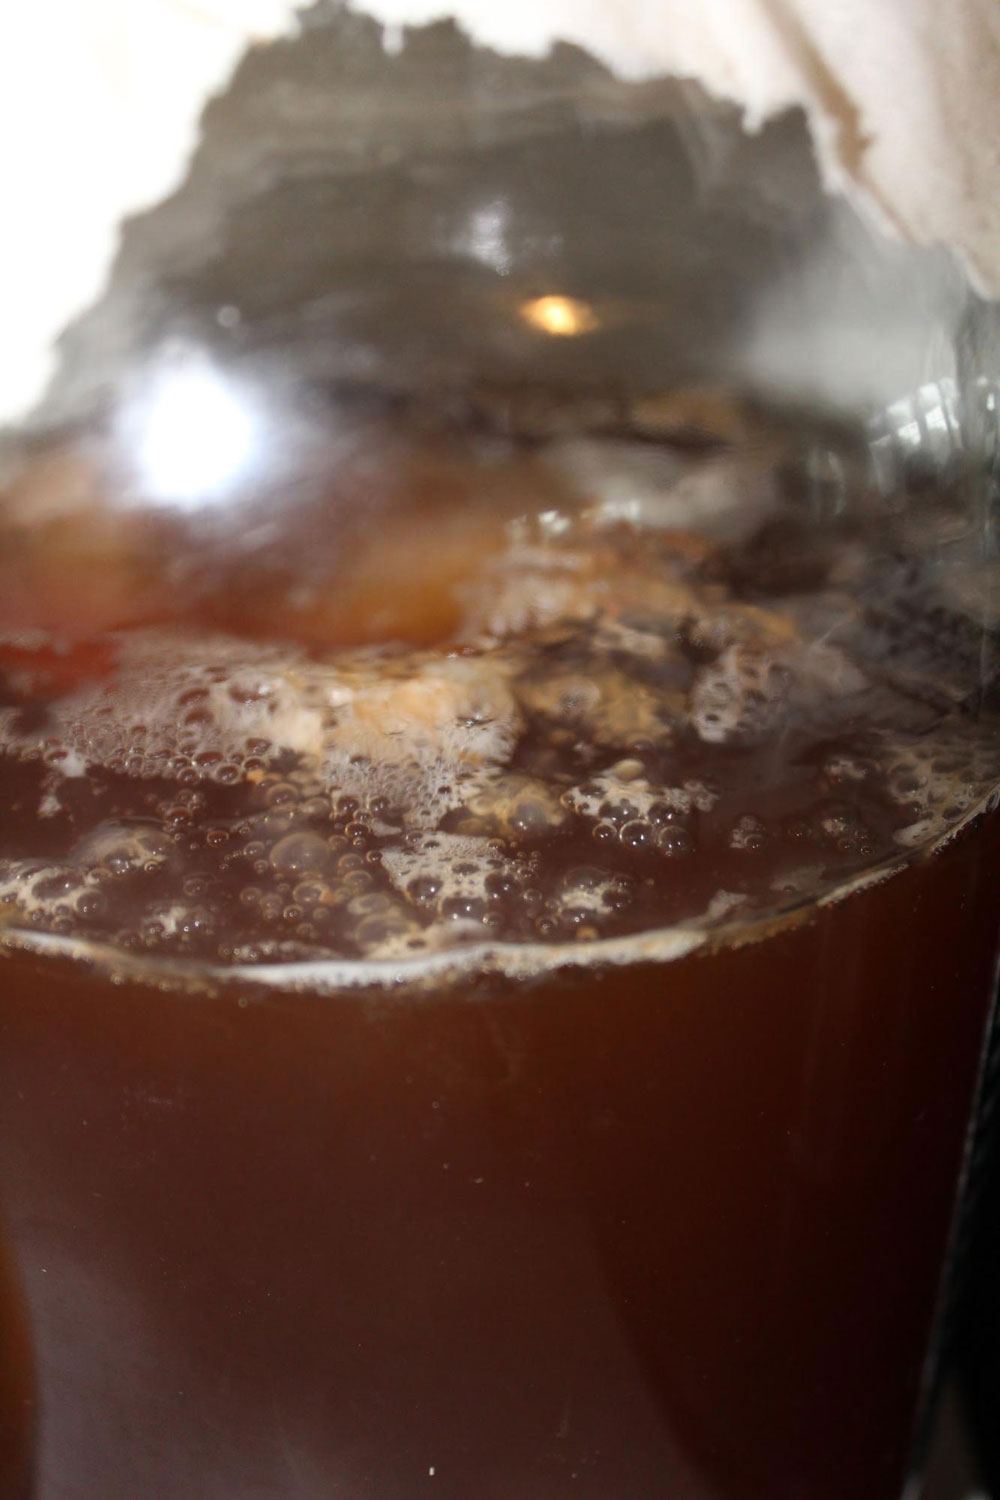 After a day of fermentation the kombucha starts to bubble